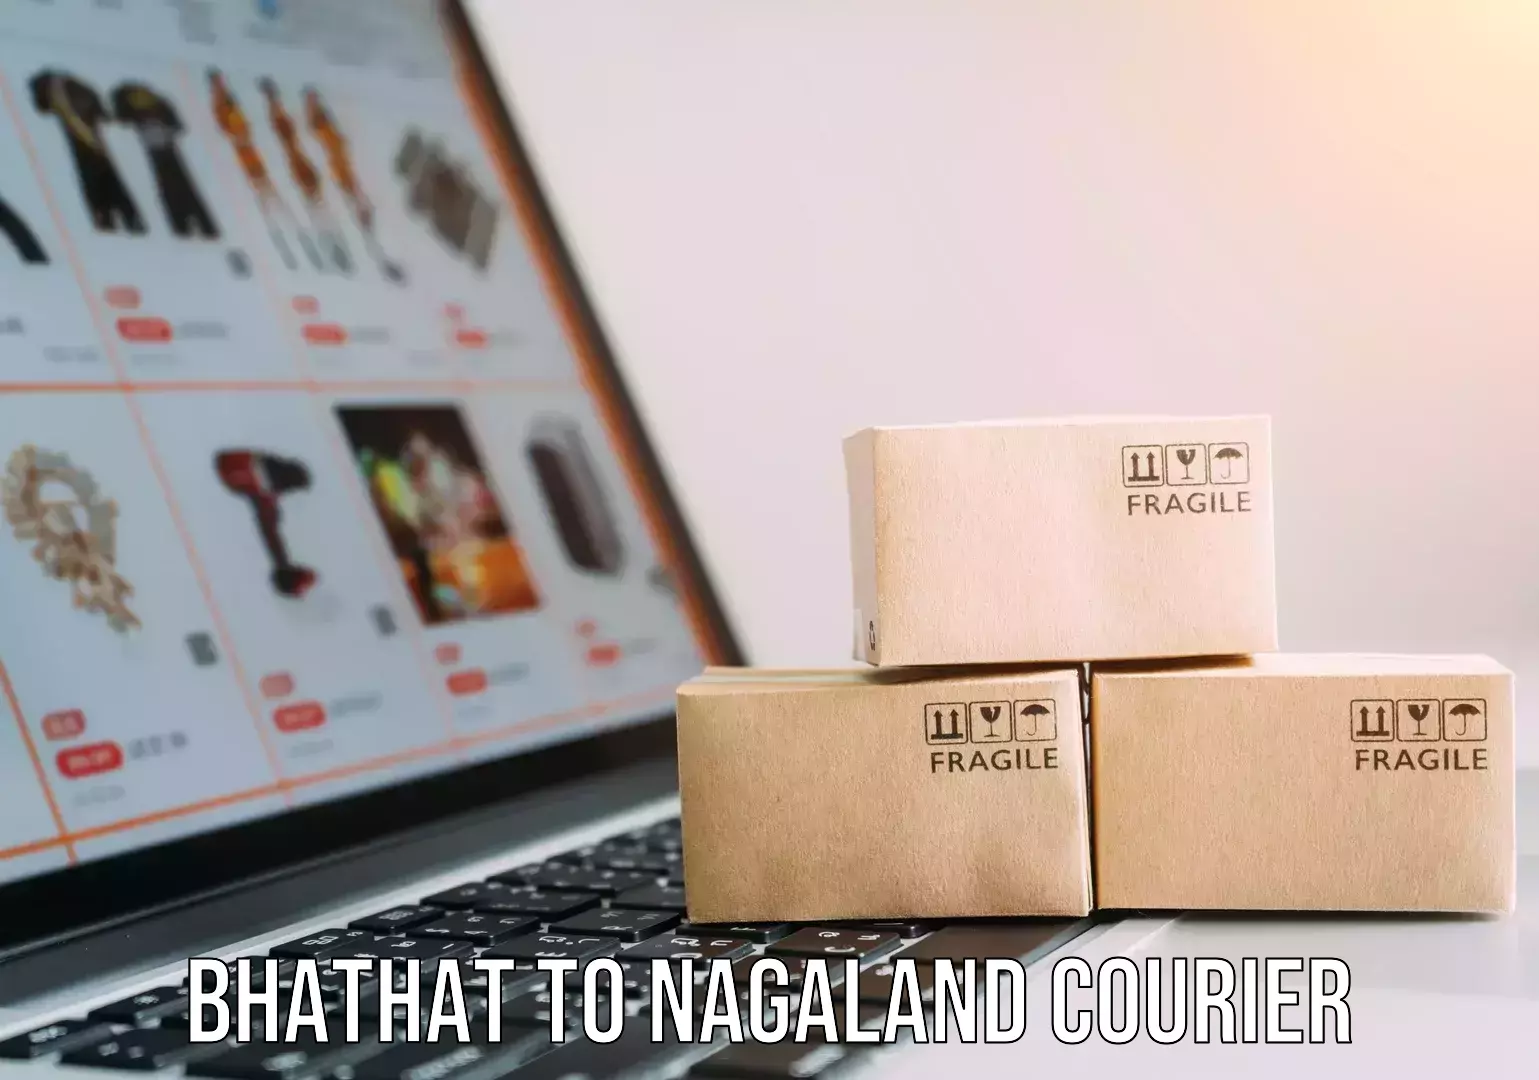 High-capacity parcel service Bhathat to Nagaland